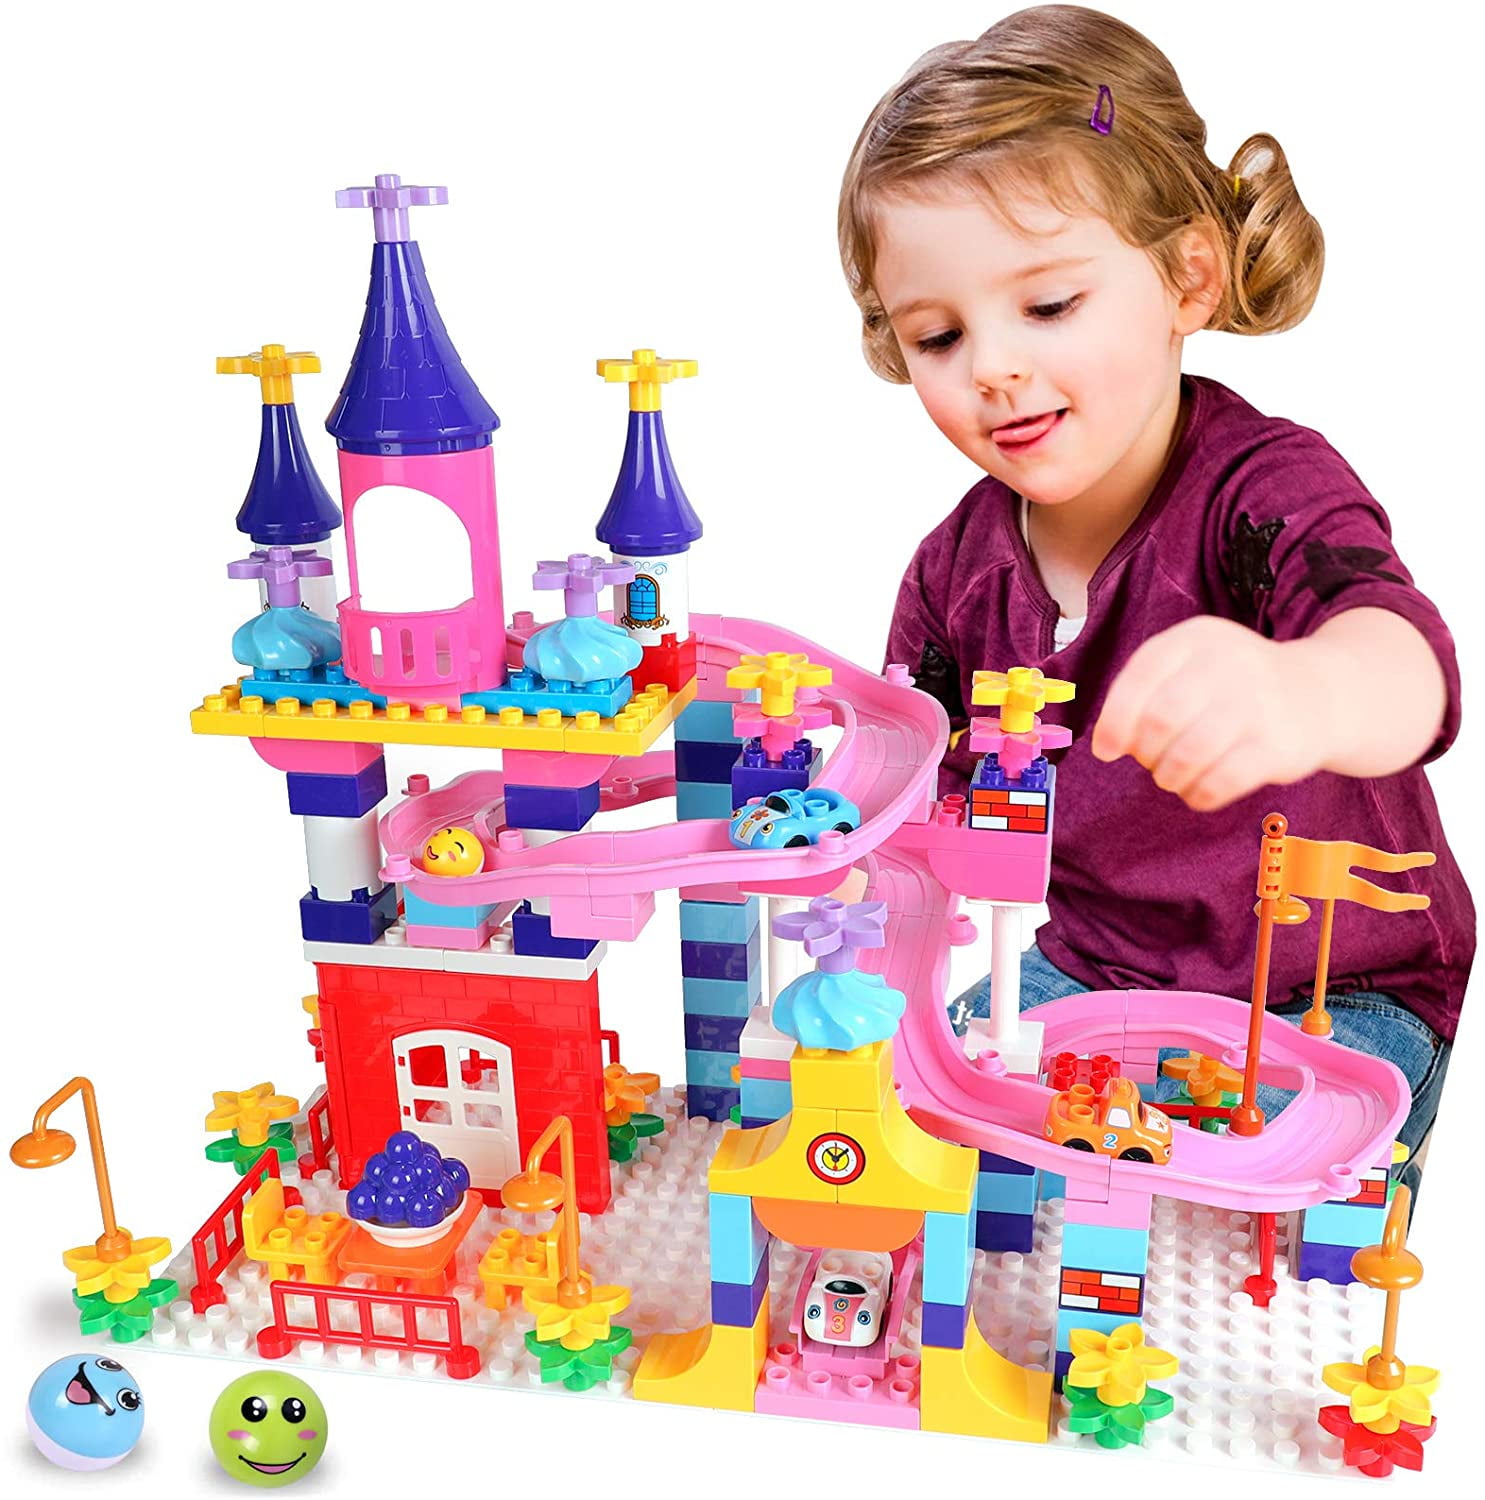 COUOMOXA Marble Run Building Blocks Classic Big Blocks STEM Toy Bricks Set  Kids Race Track Compatible with All Major Brands 110 PCS Various Track  Models for Boys Girls Aged 3,4,5,6,8 (Upgrade 2